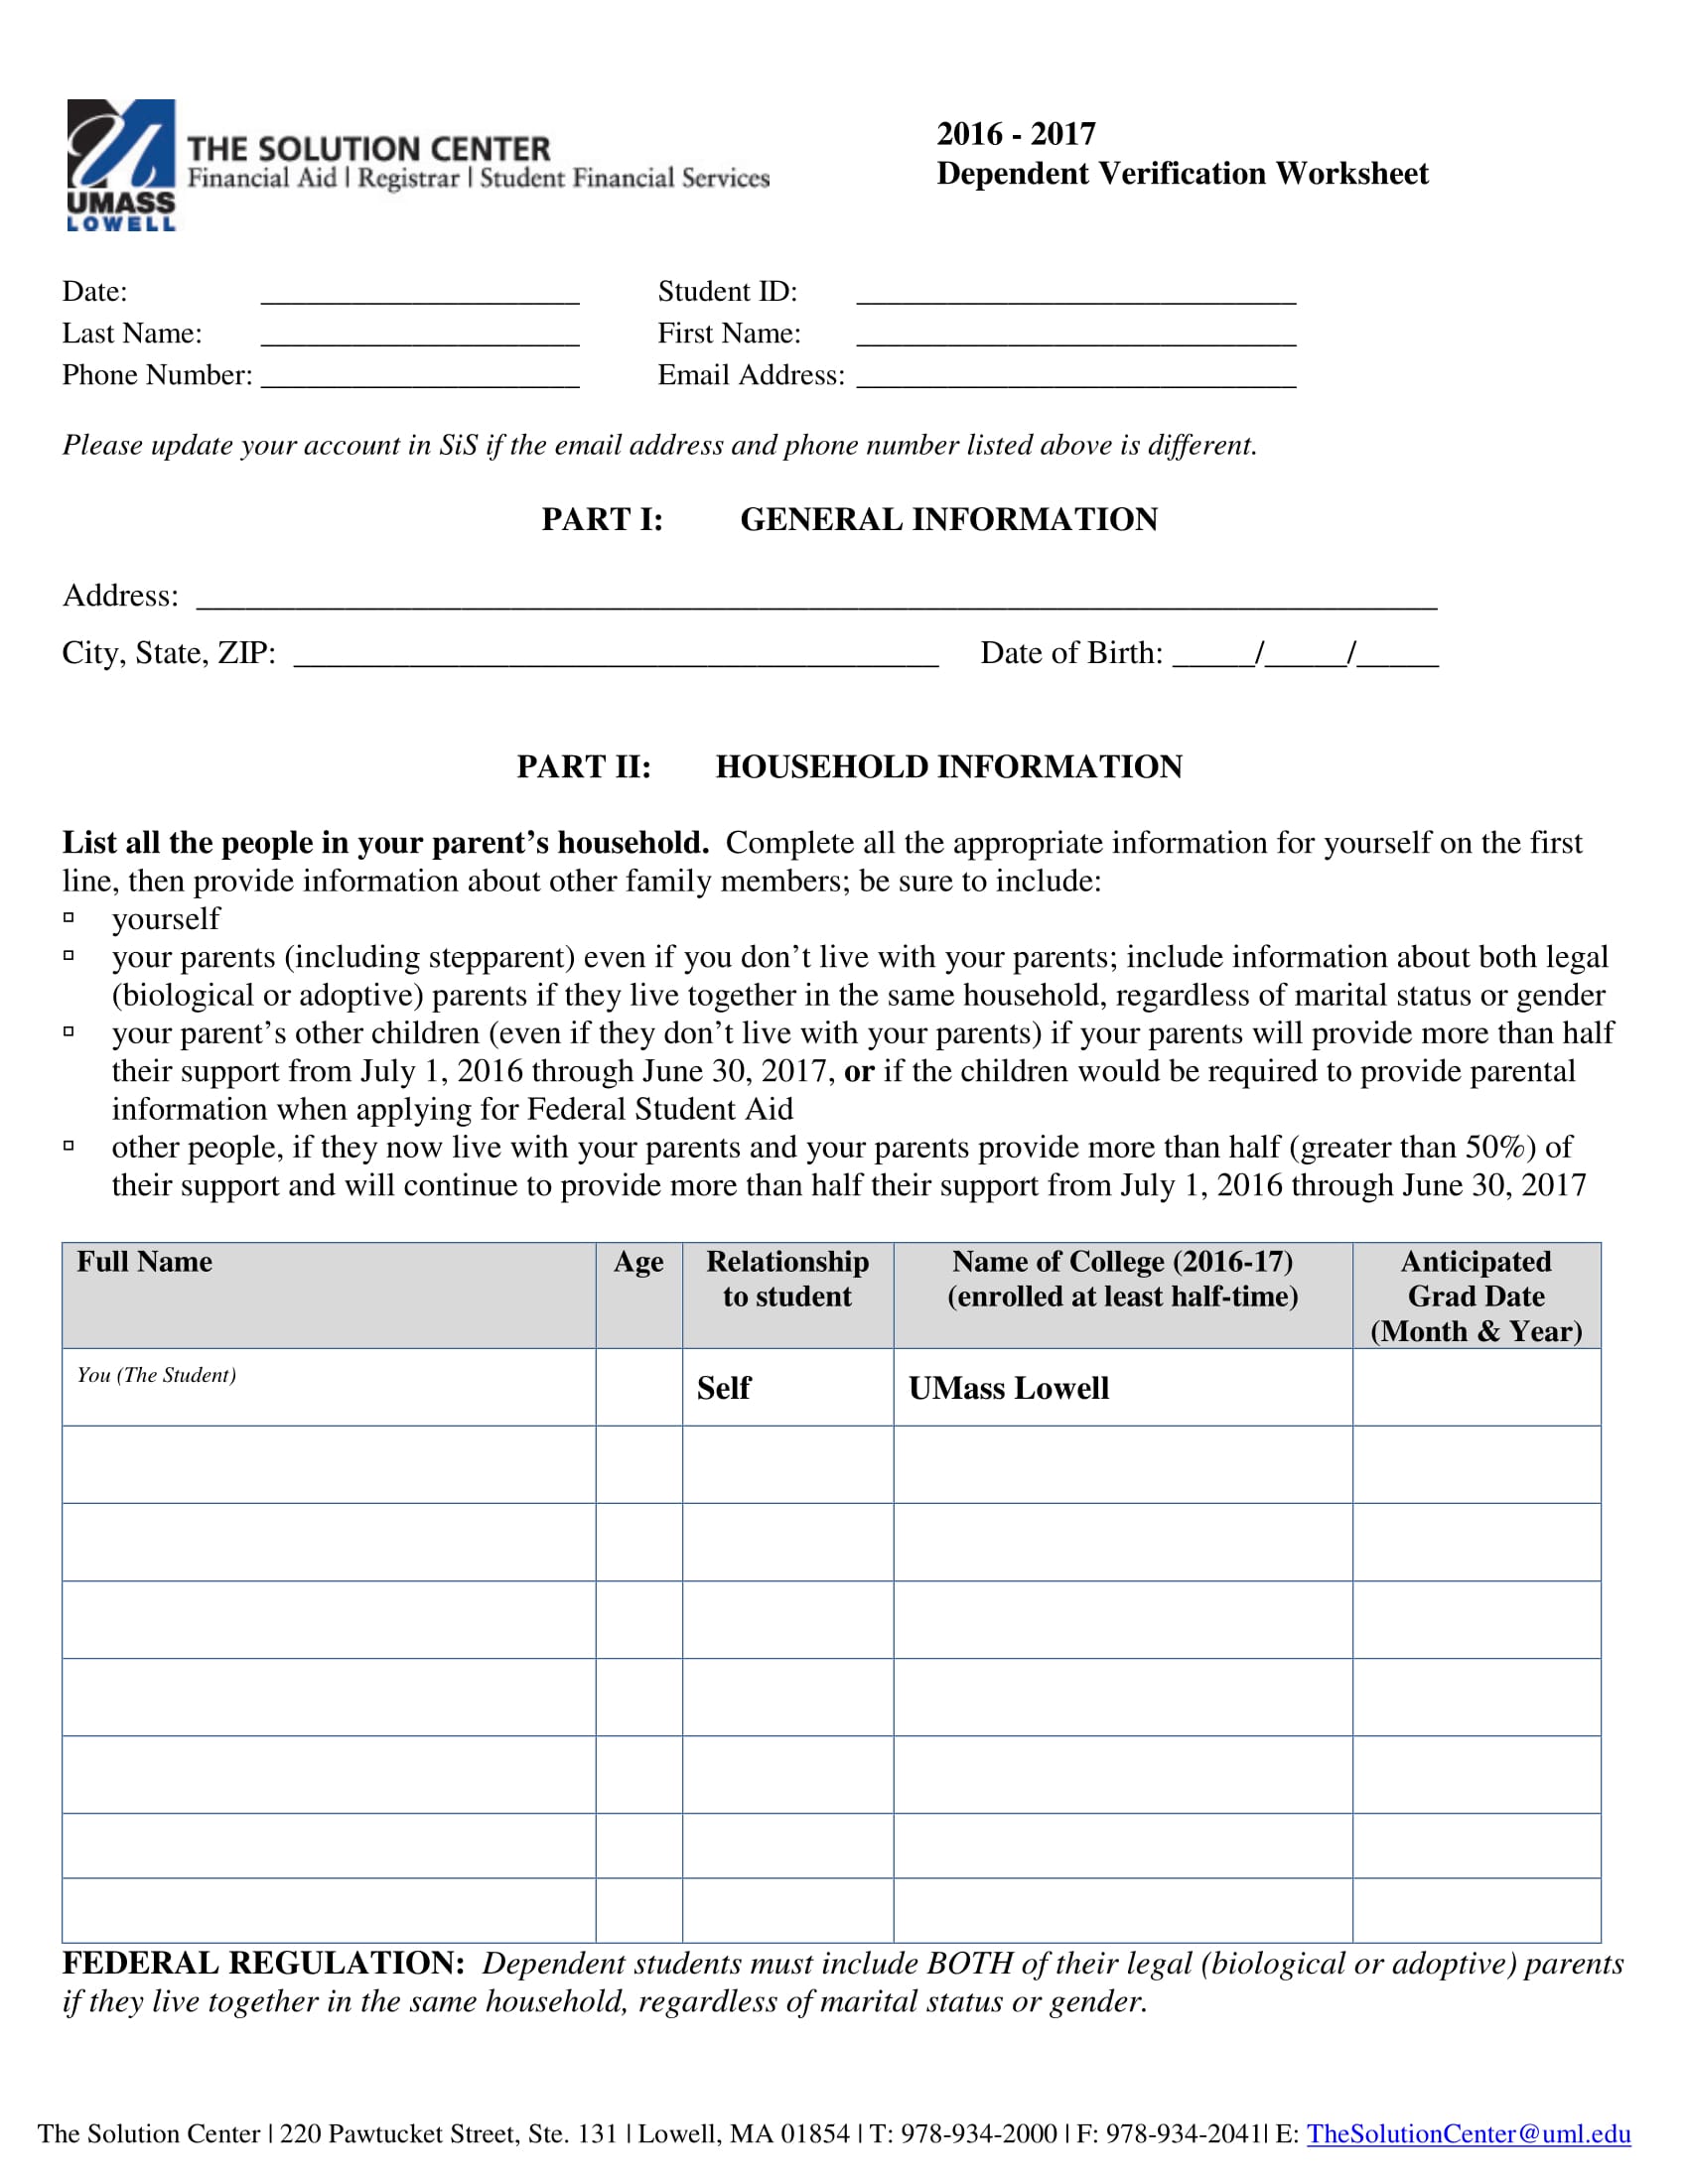 what is a verification worksheet for financial aid